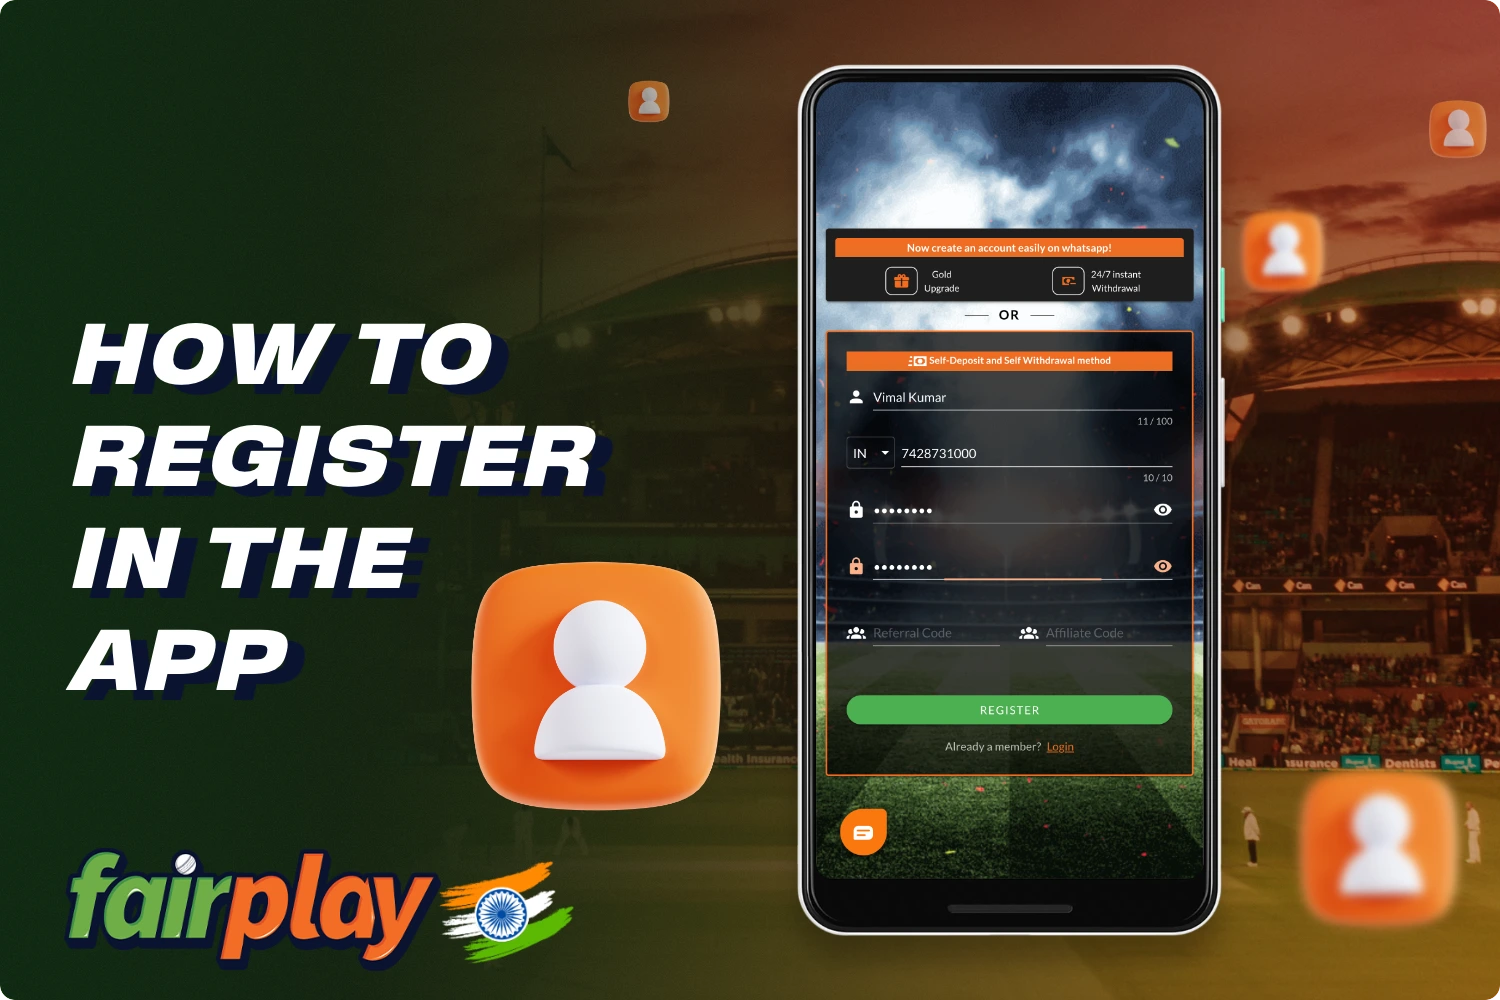 Registering an account on the Fairplay app is necessary to access all the features of the platform